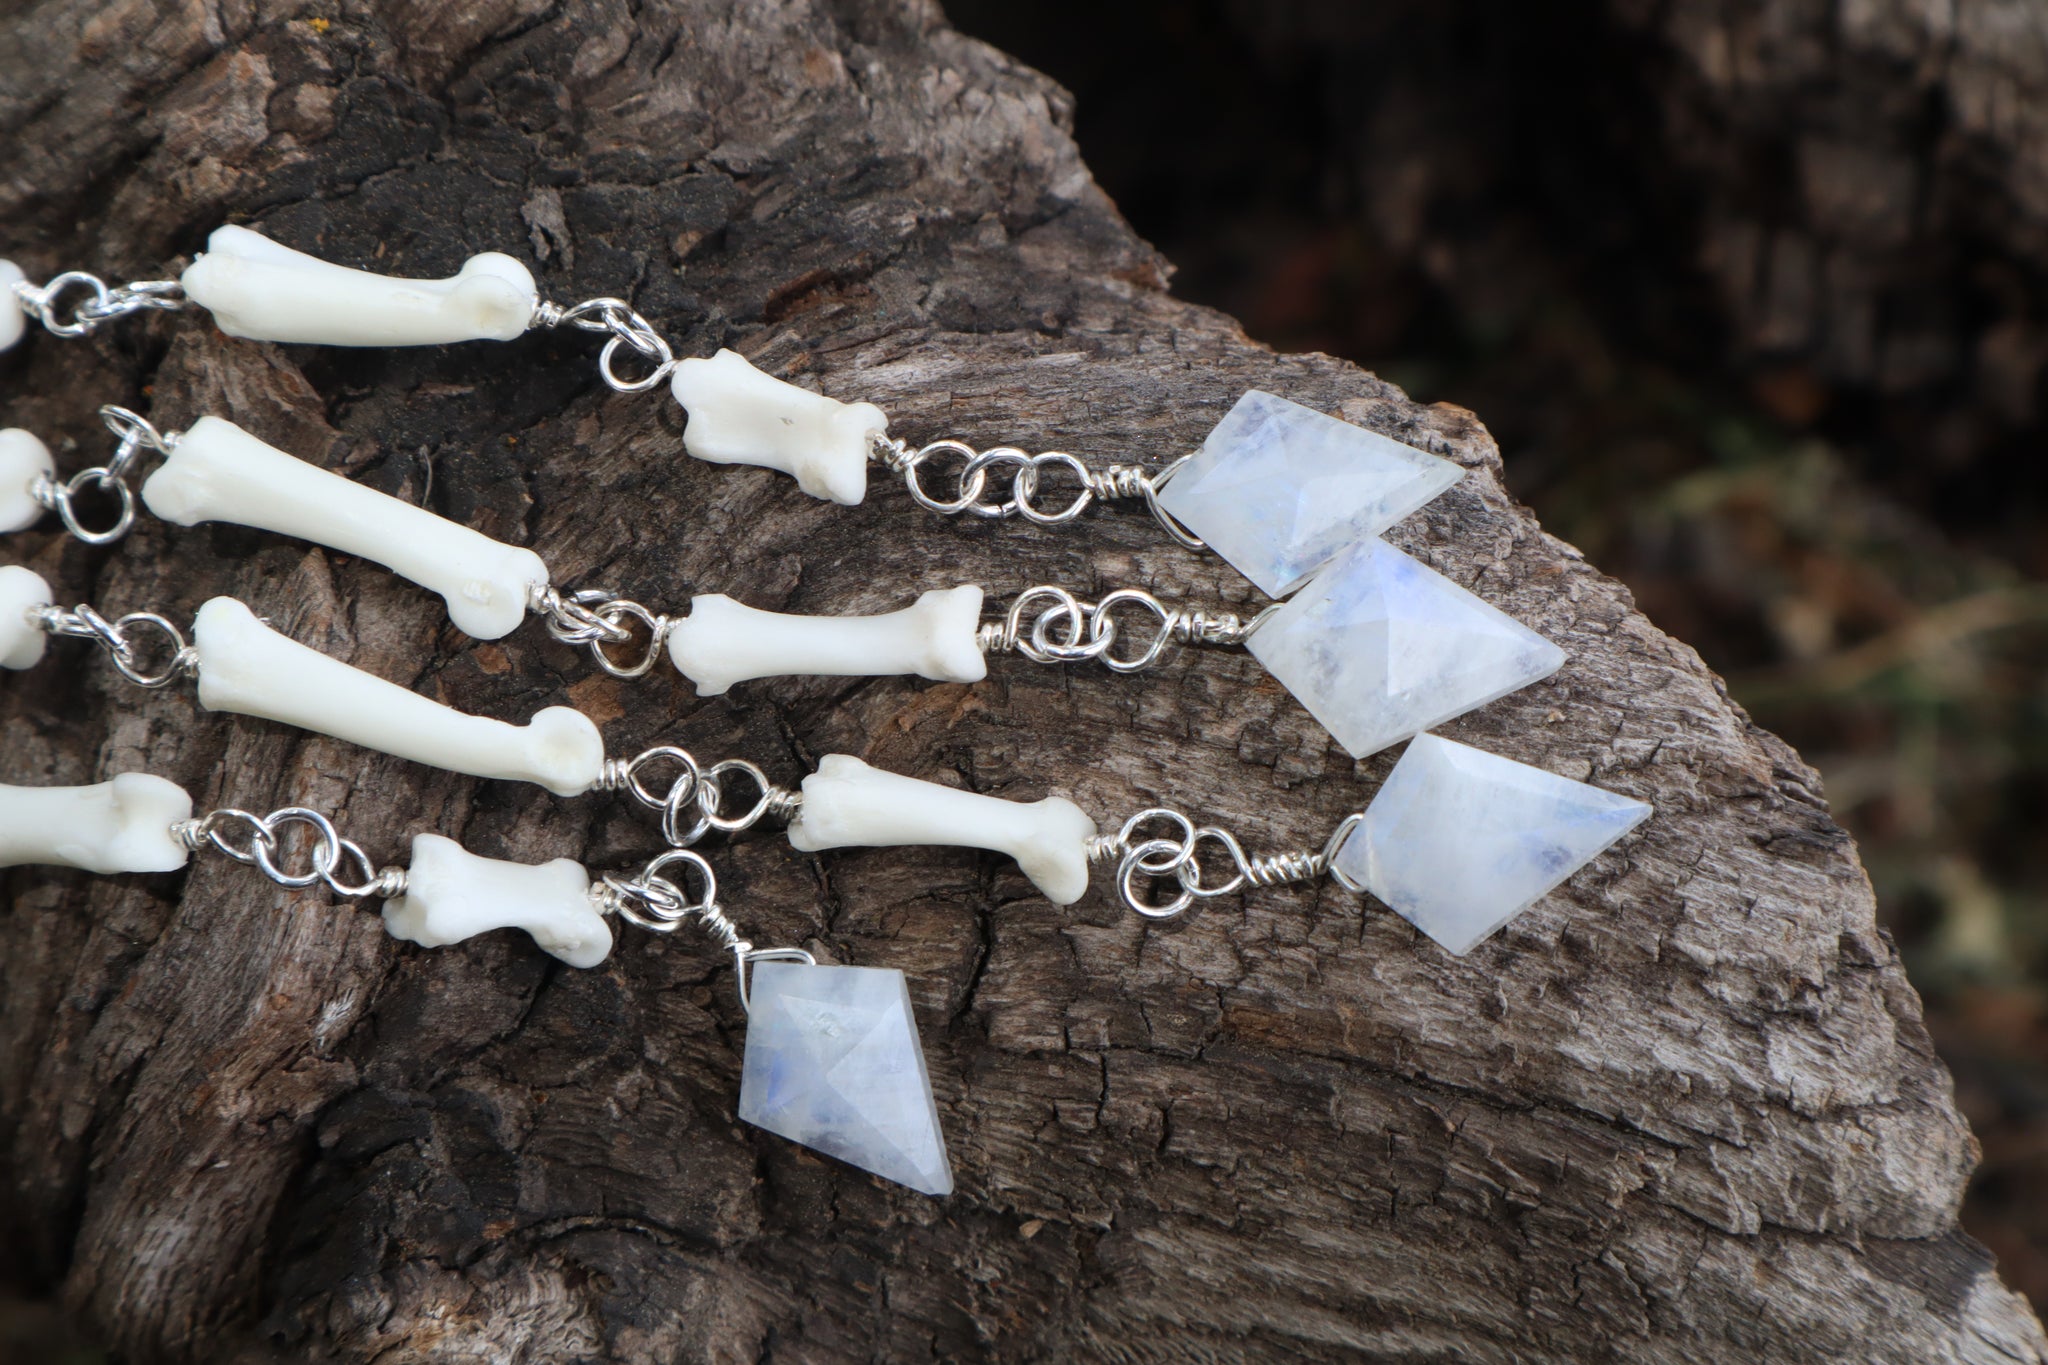 Red Fox Arm Fluid Articulation with Moonstone "Claws"